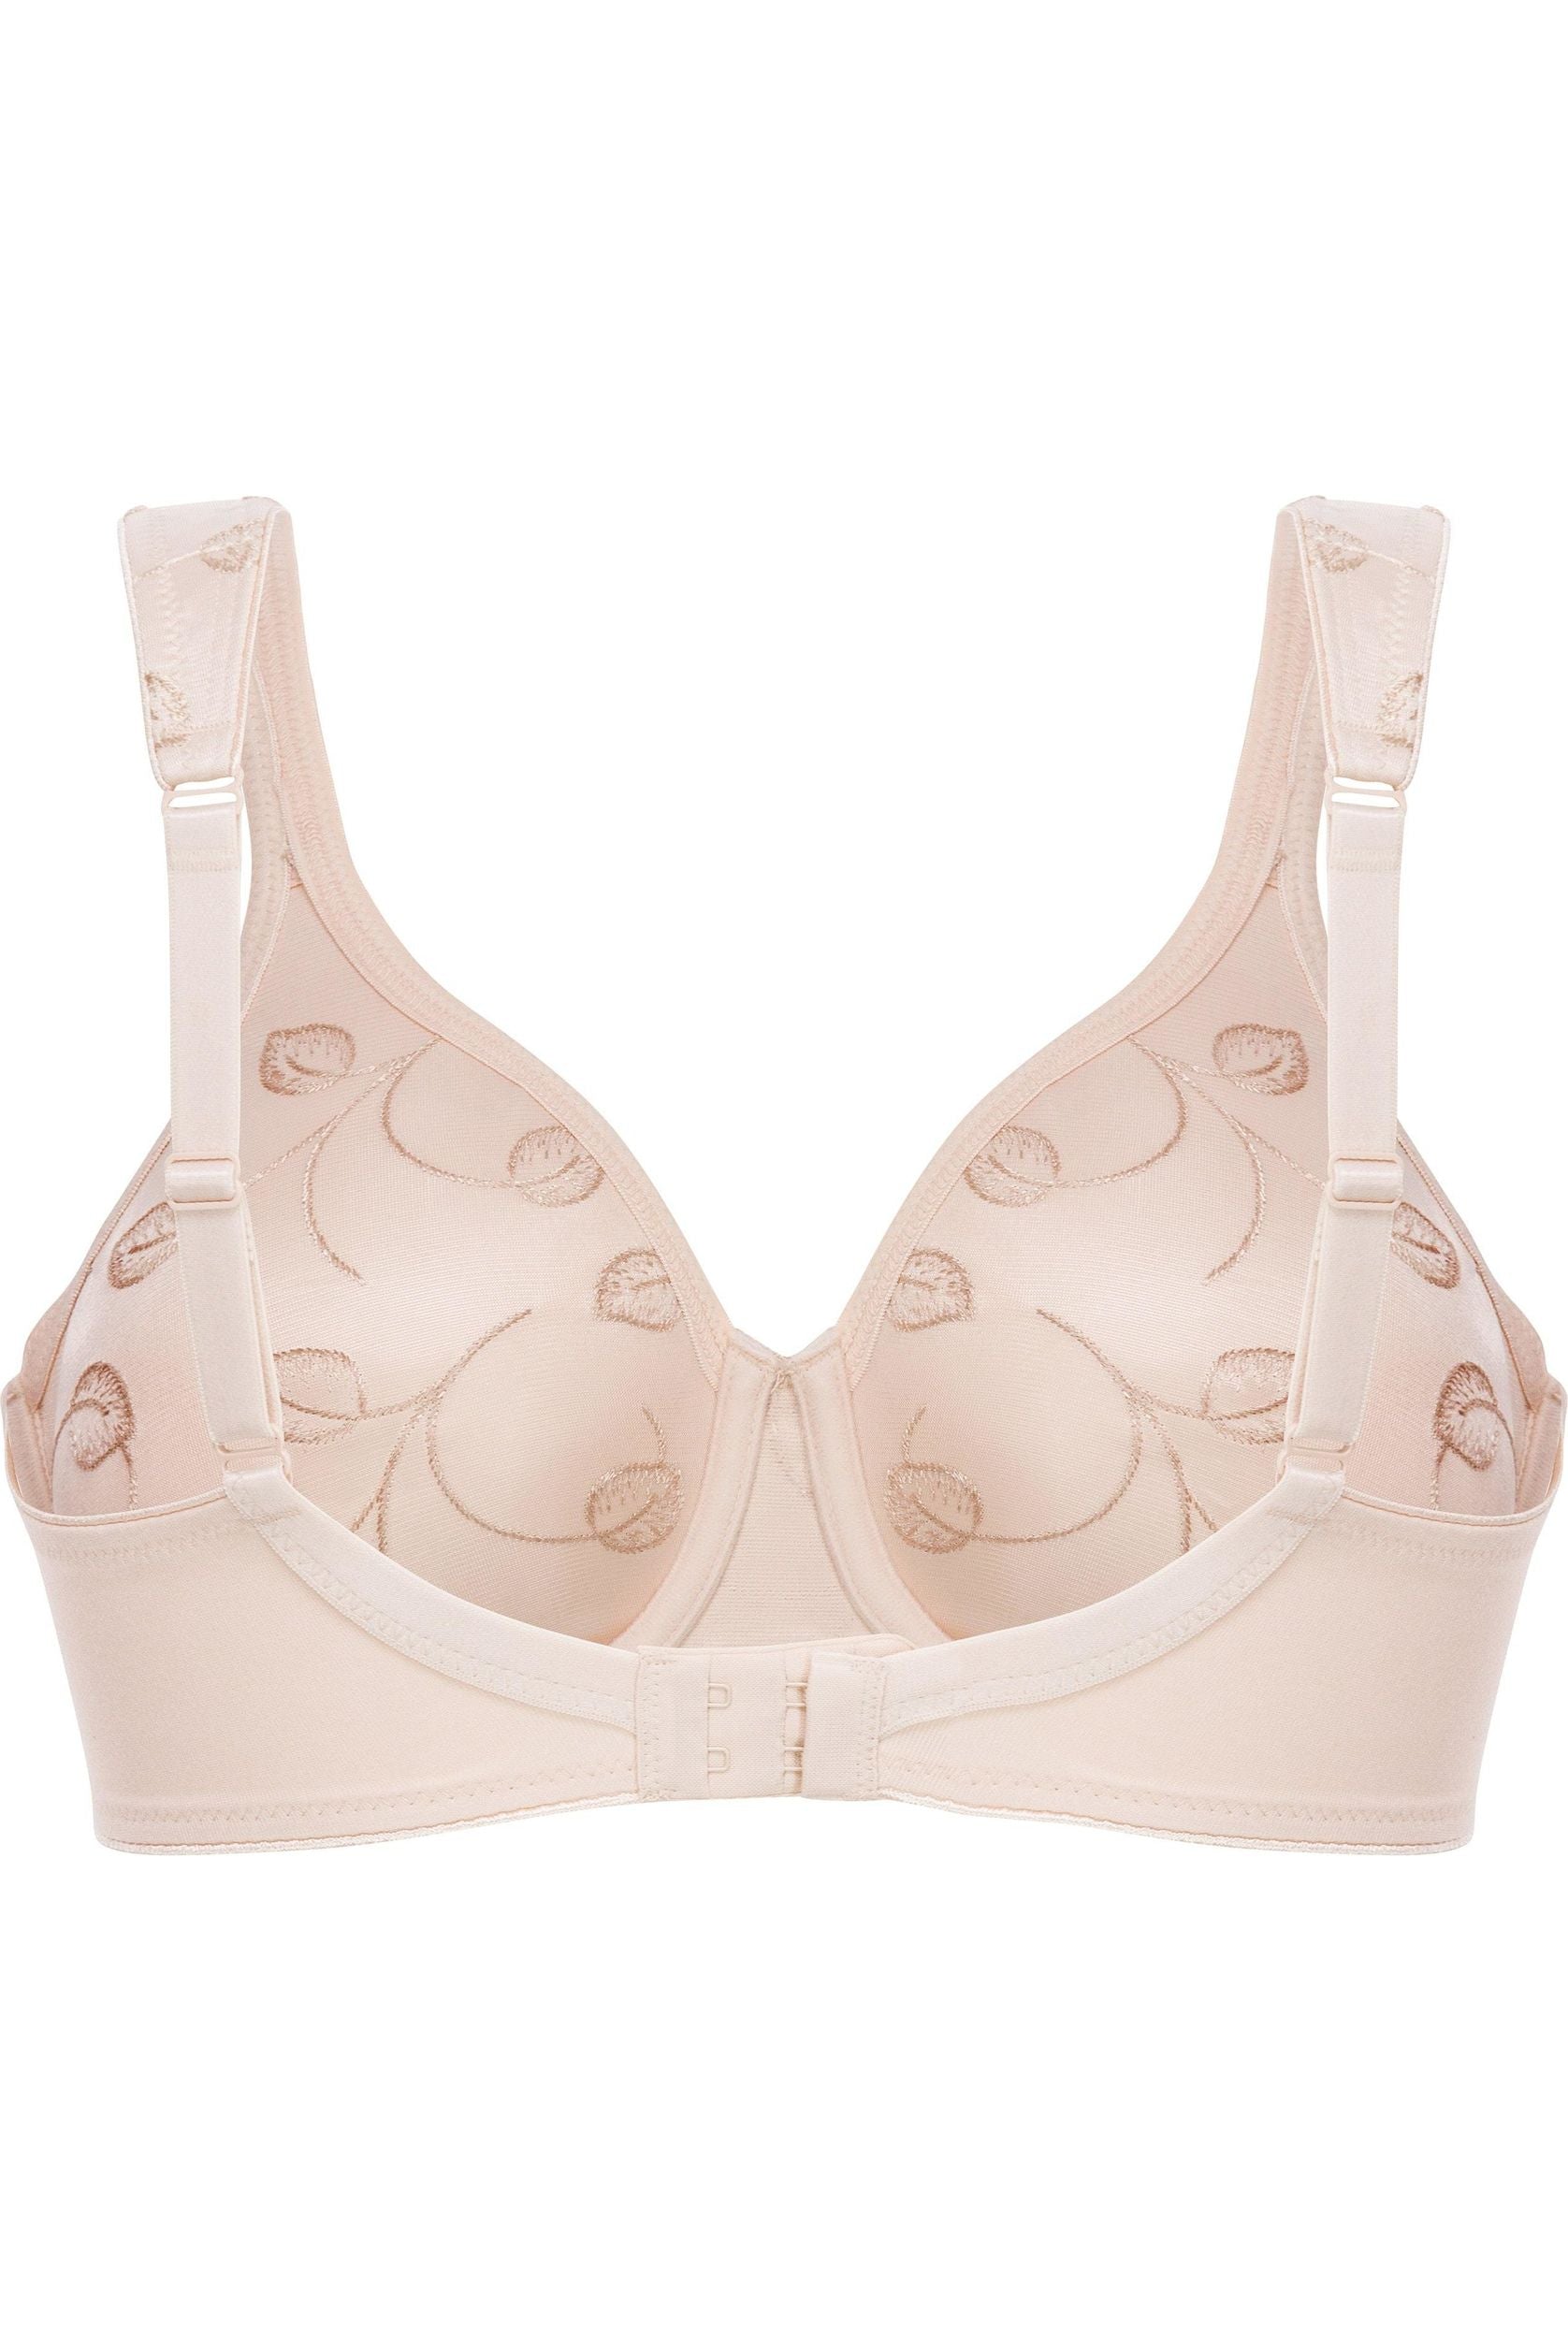 Any 2 Bras for $60 or LESS w/ code USA → - Felina